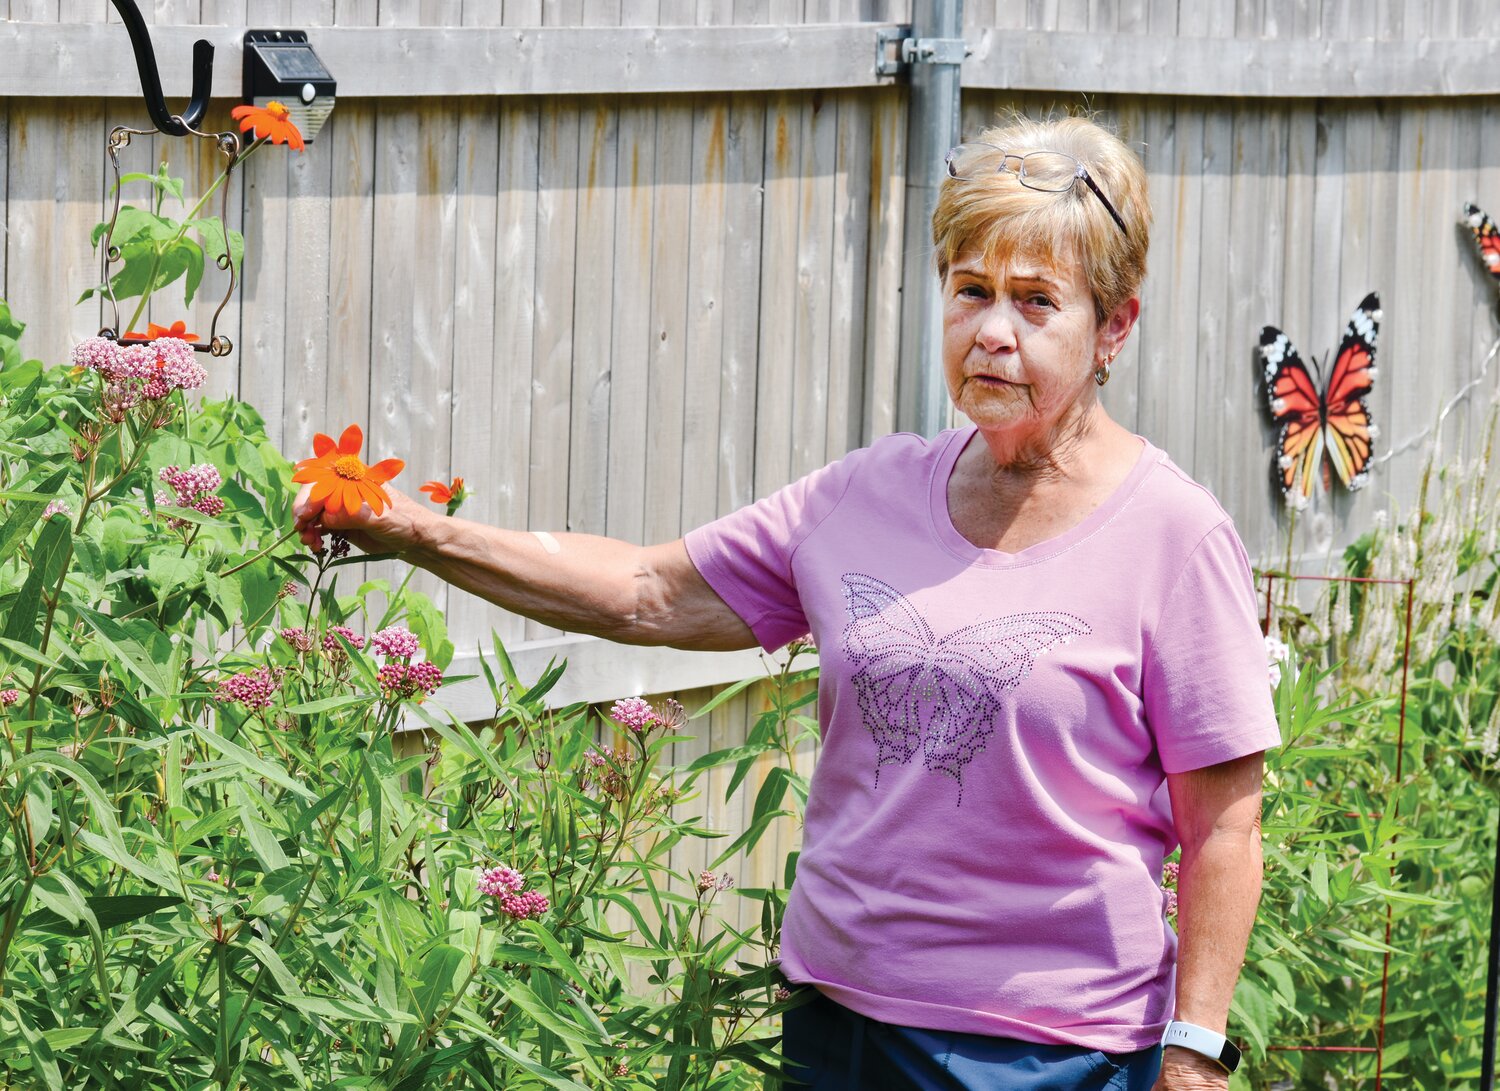 SHE CALLS THEM ‘FLYING FLOWERS”:  Amy Ottilige has been raising butterflies since 2014, planting milkweed and perennials in her garden to support them.